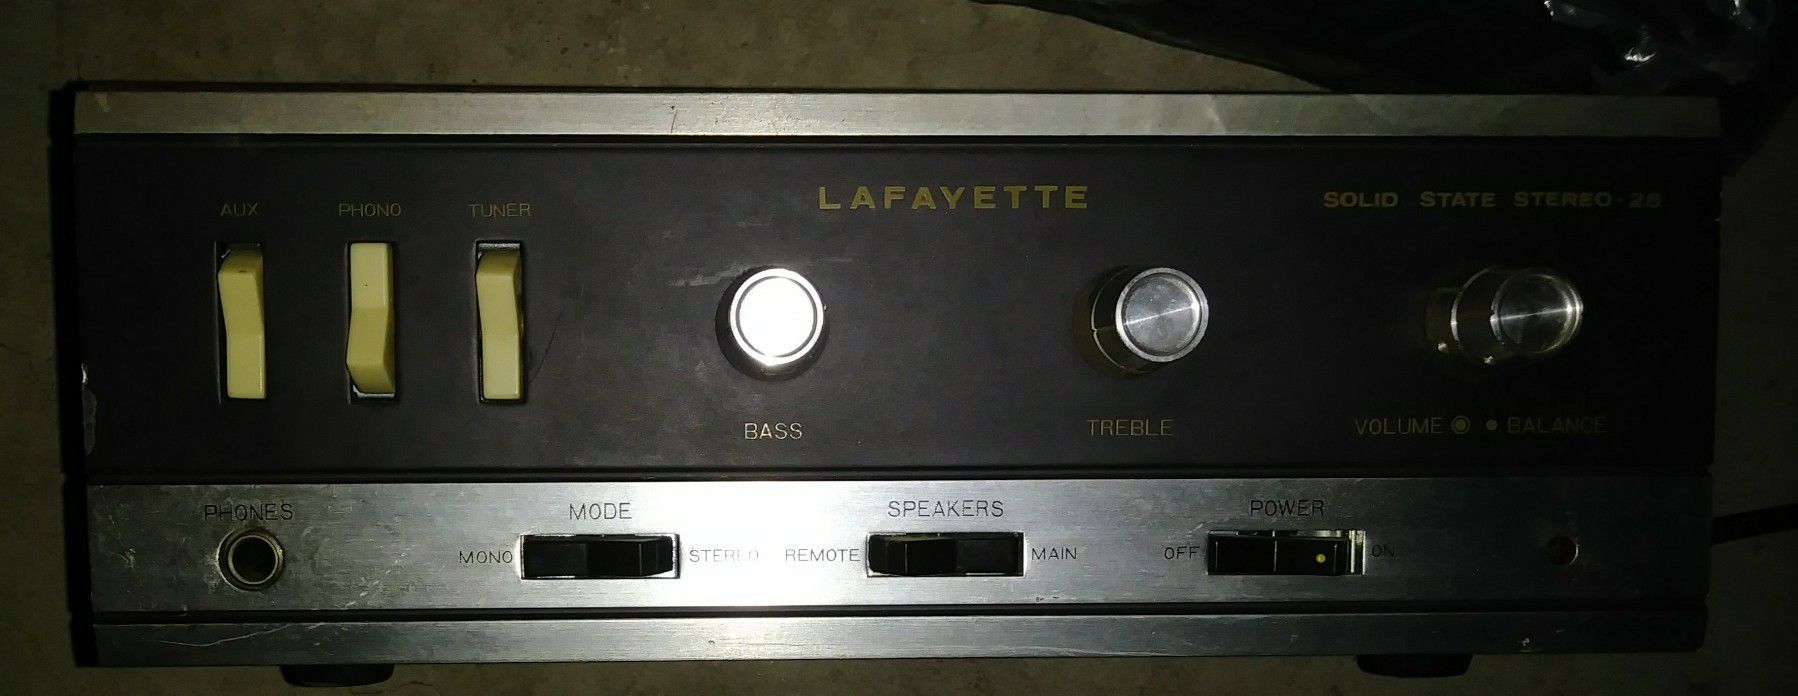 Vintage Lafayette Solid State Stereo-25 Hi-Fi Amplifier